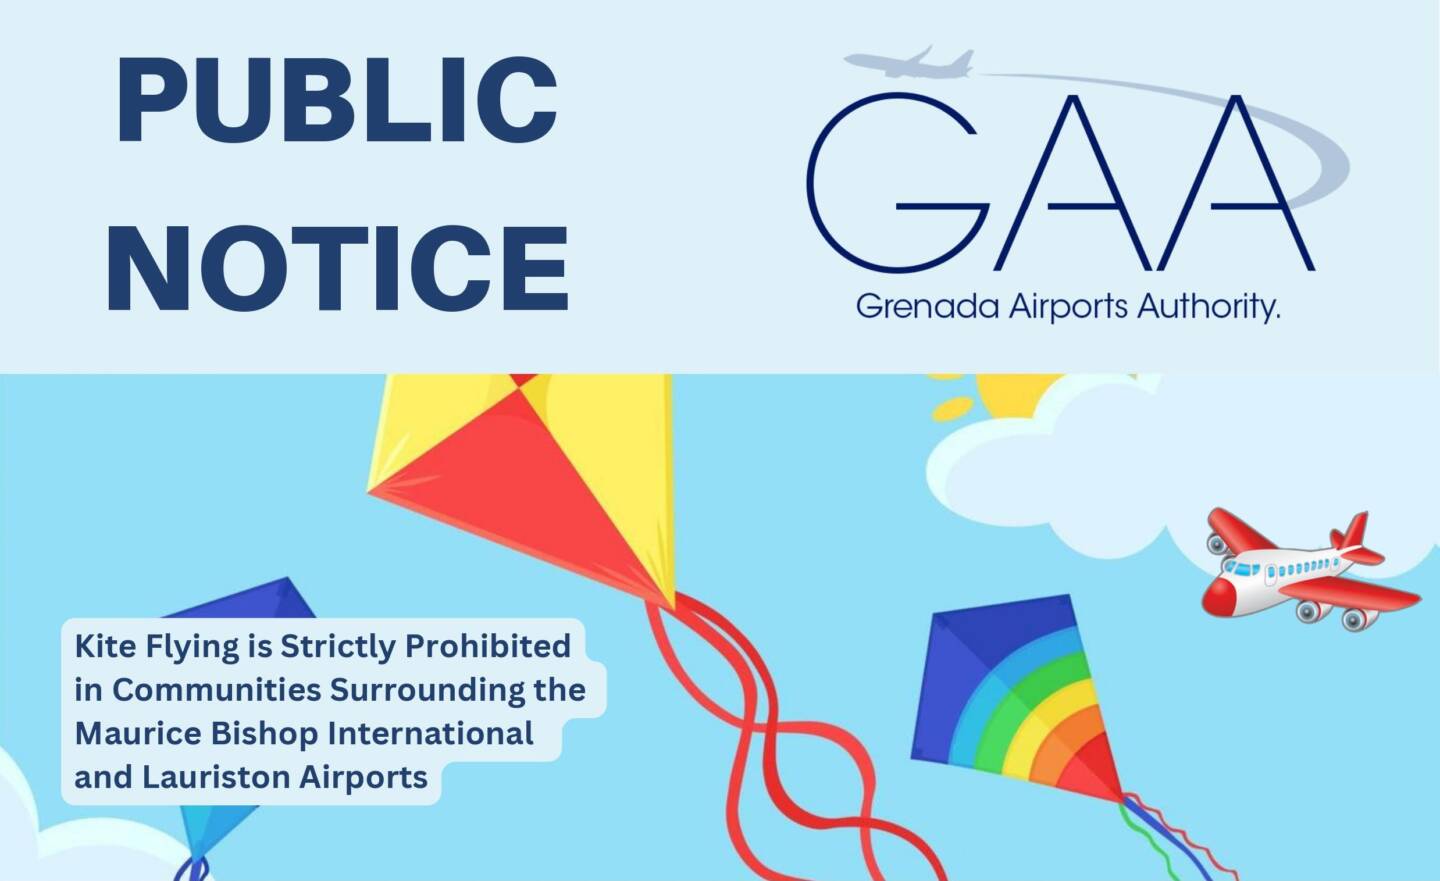 Flying kites within vicinity of airport is prohibited